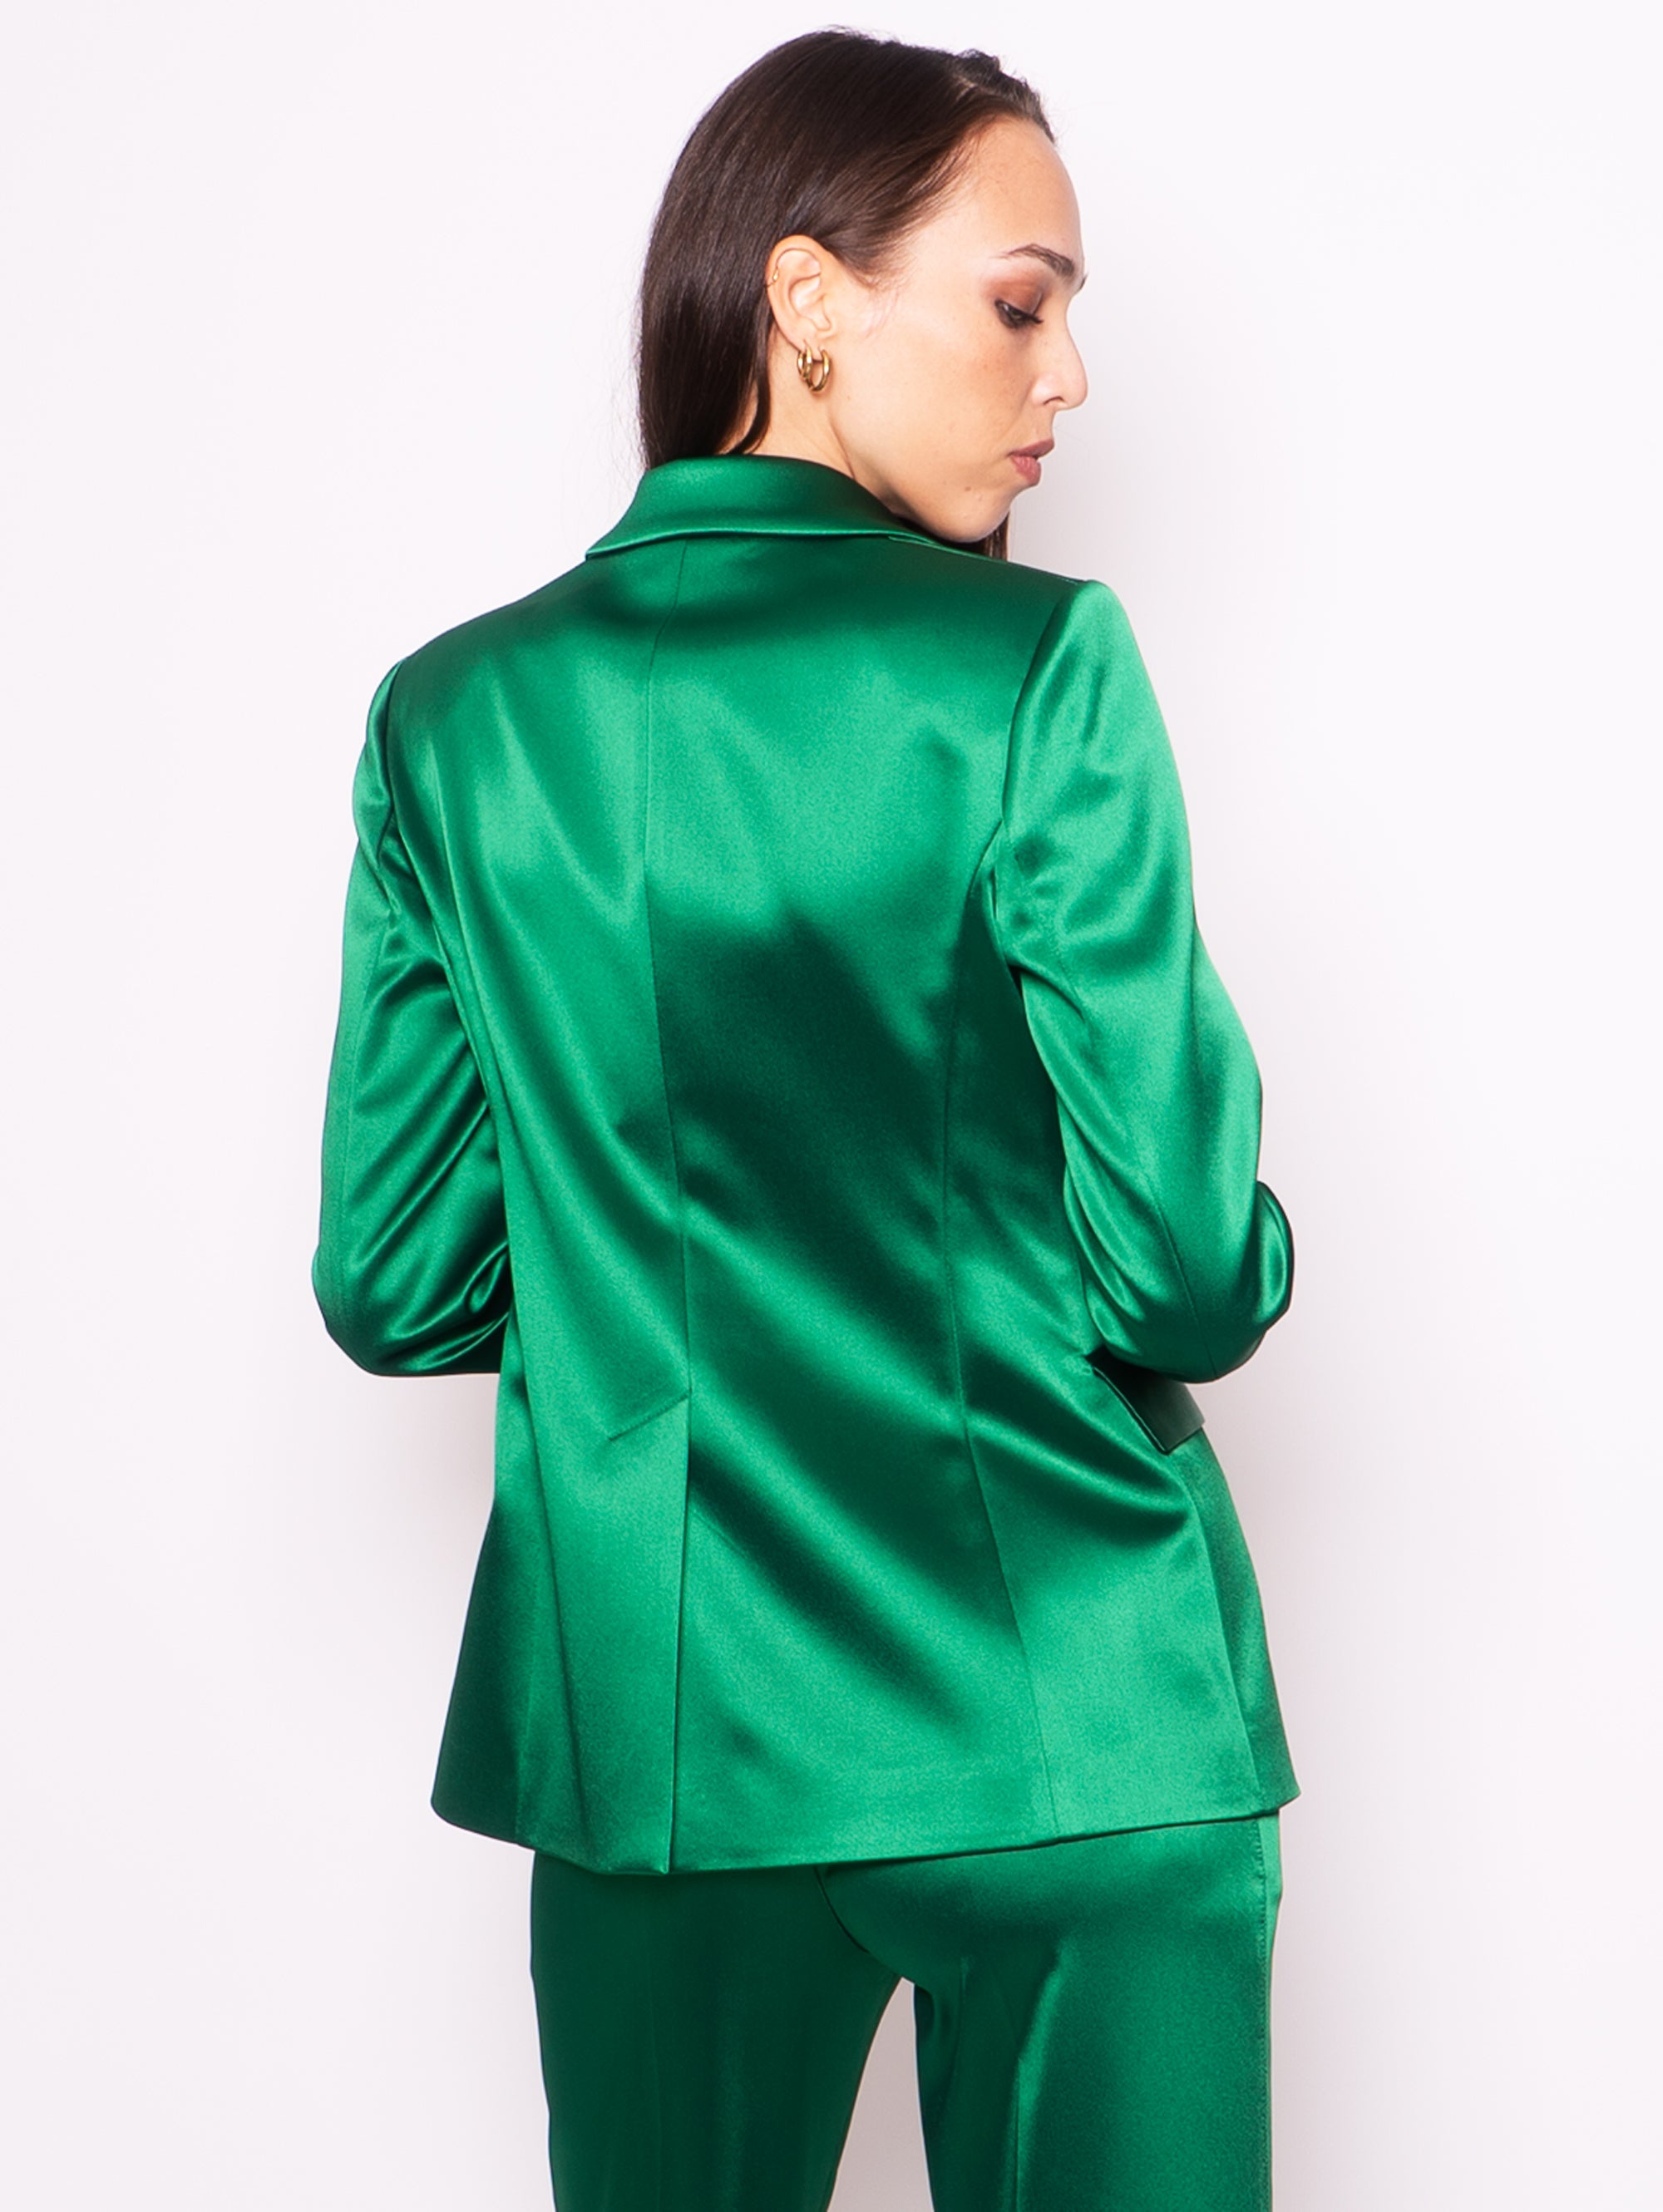 One-Breasted Jacket in Green Satin